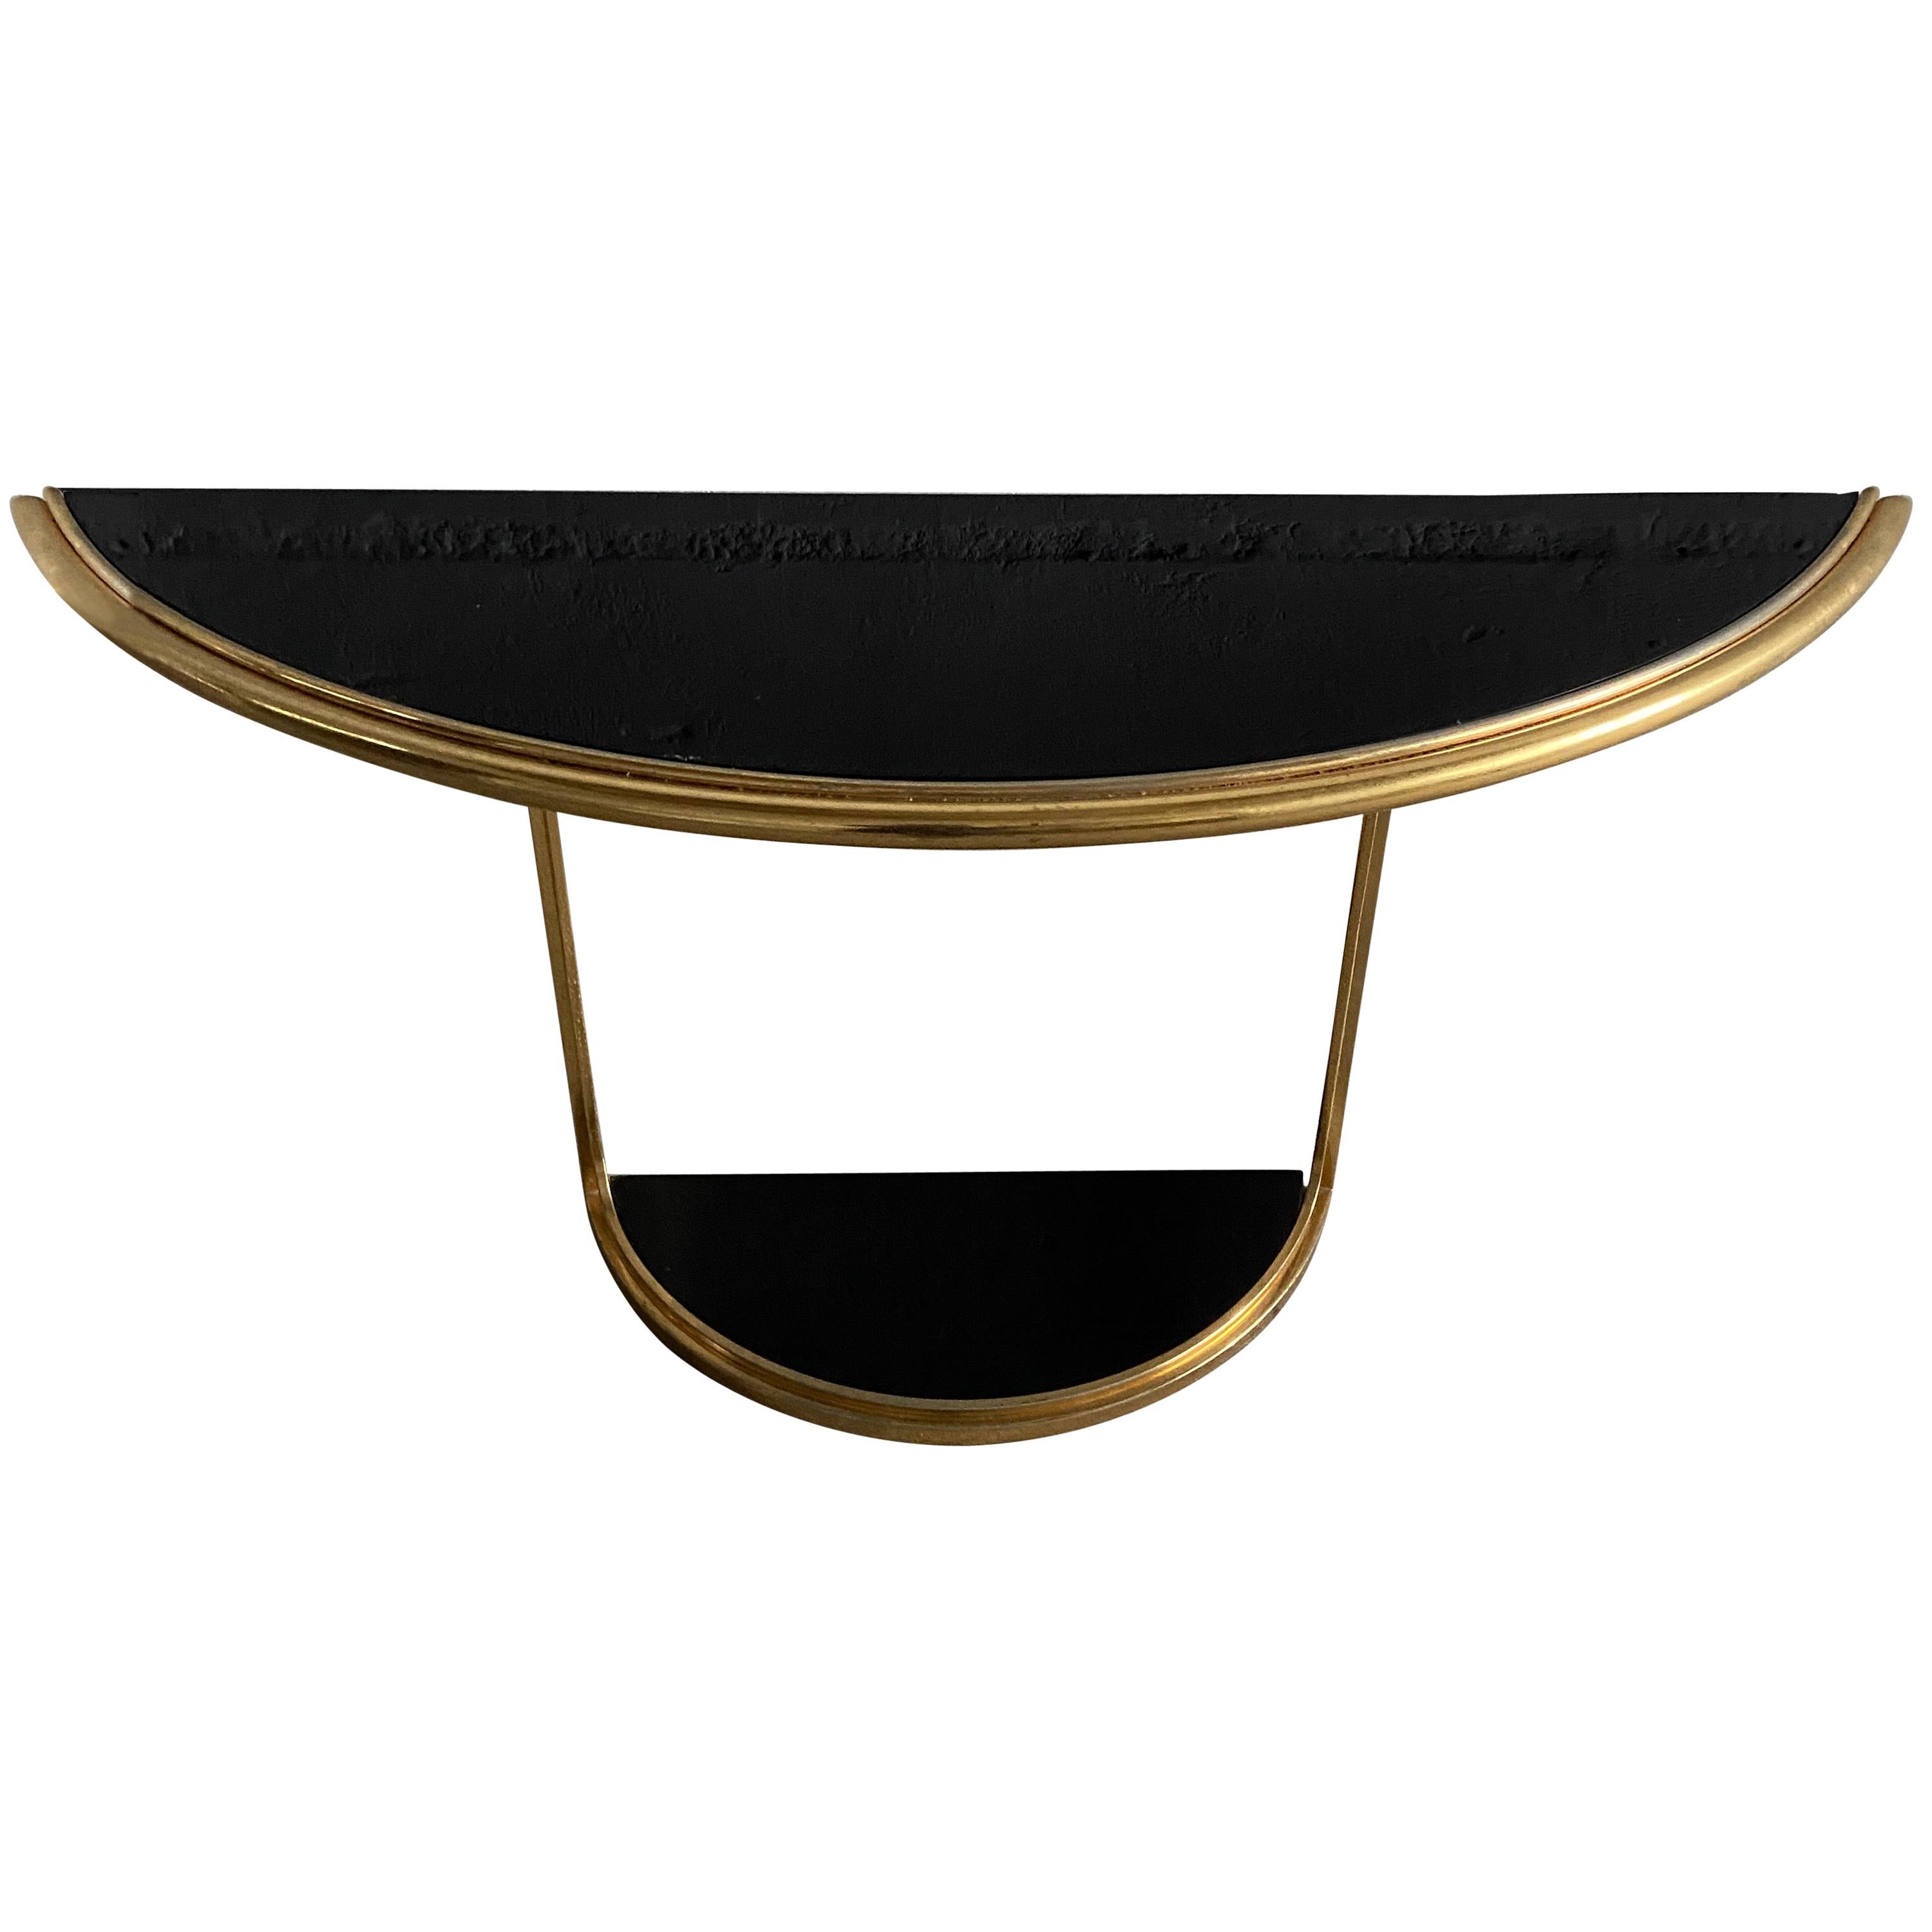 Mid-Century Modern Italian Gilt Metal Console Table with Black Glass, 1970s